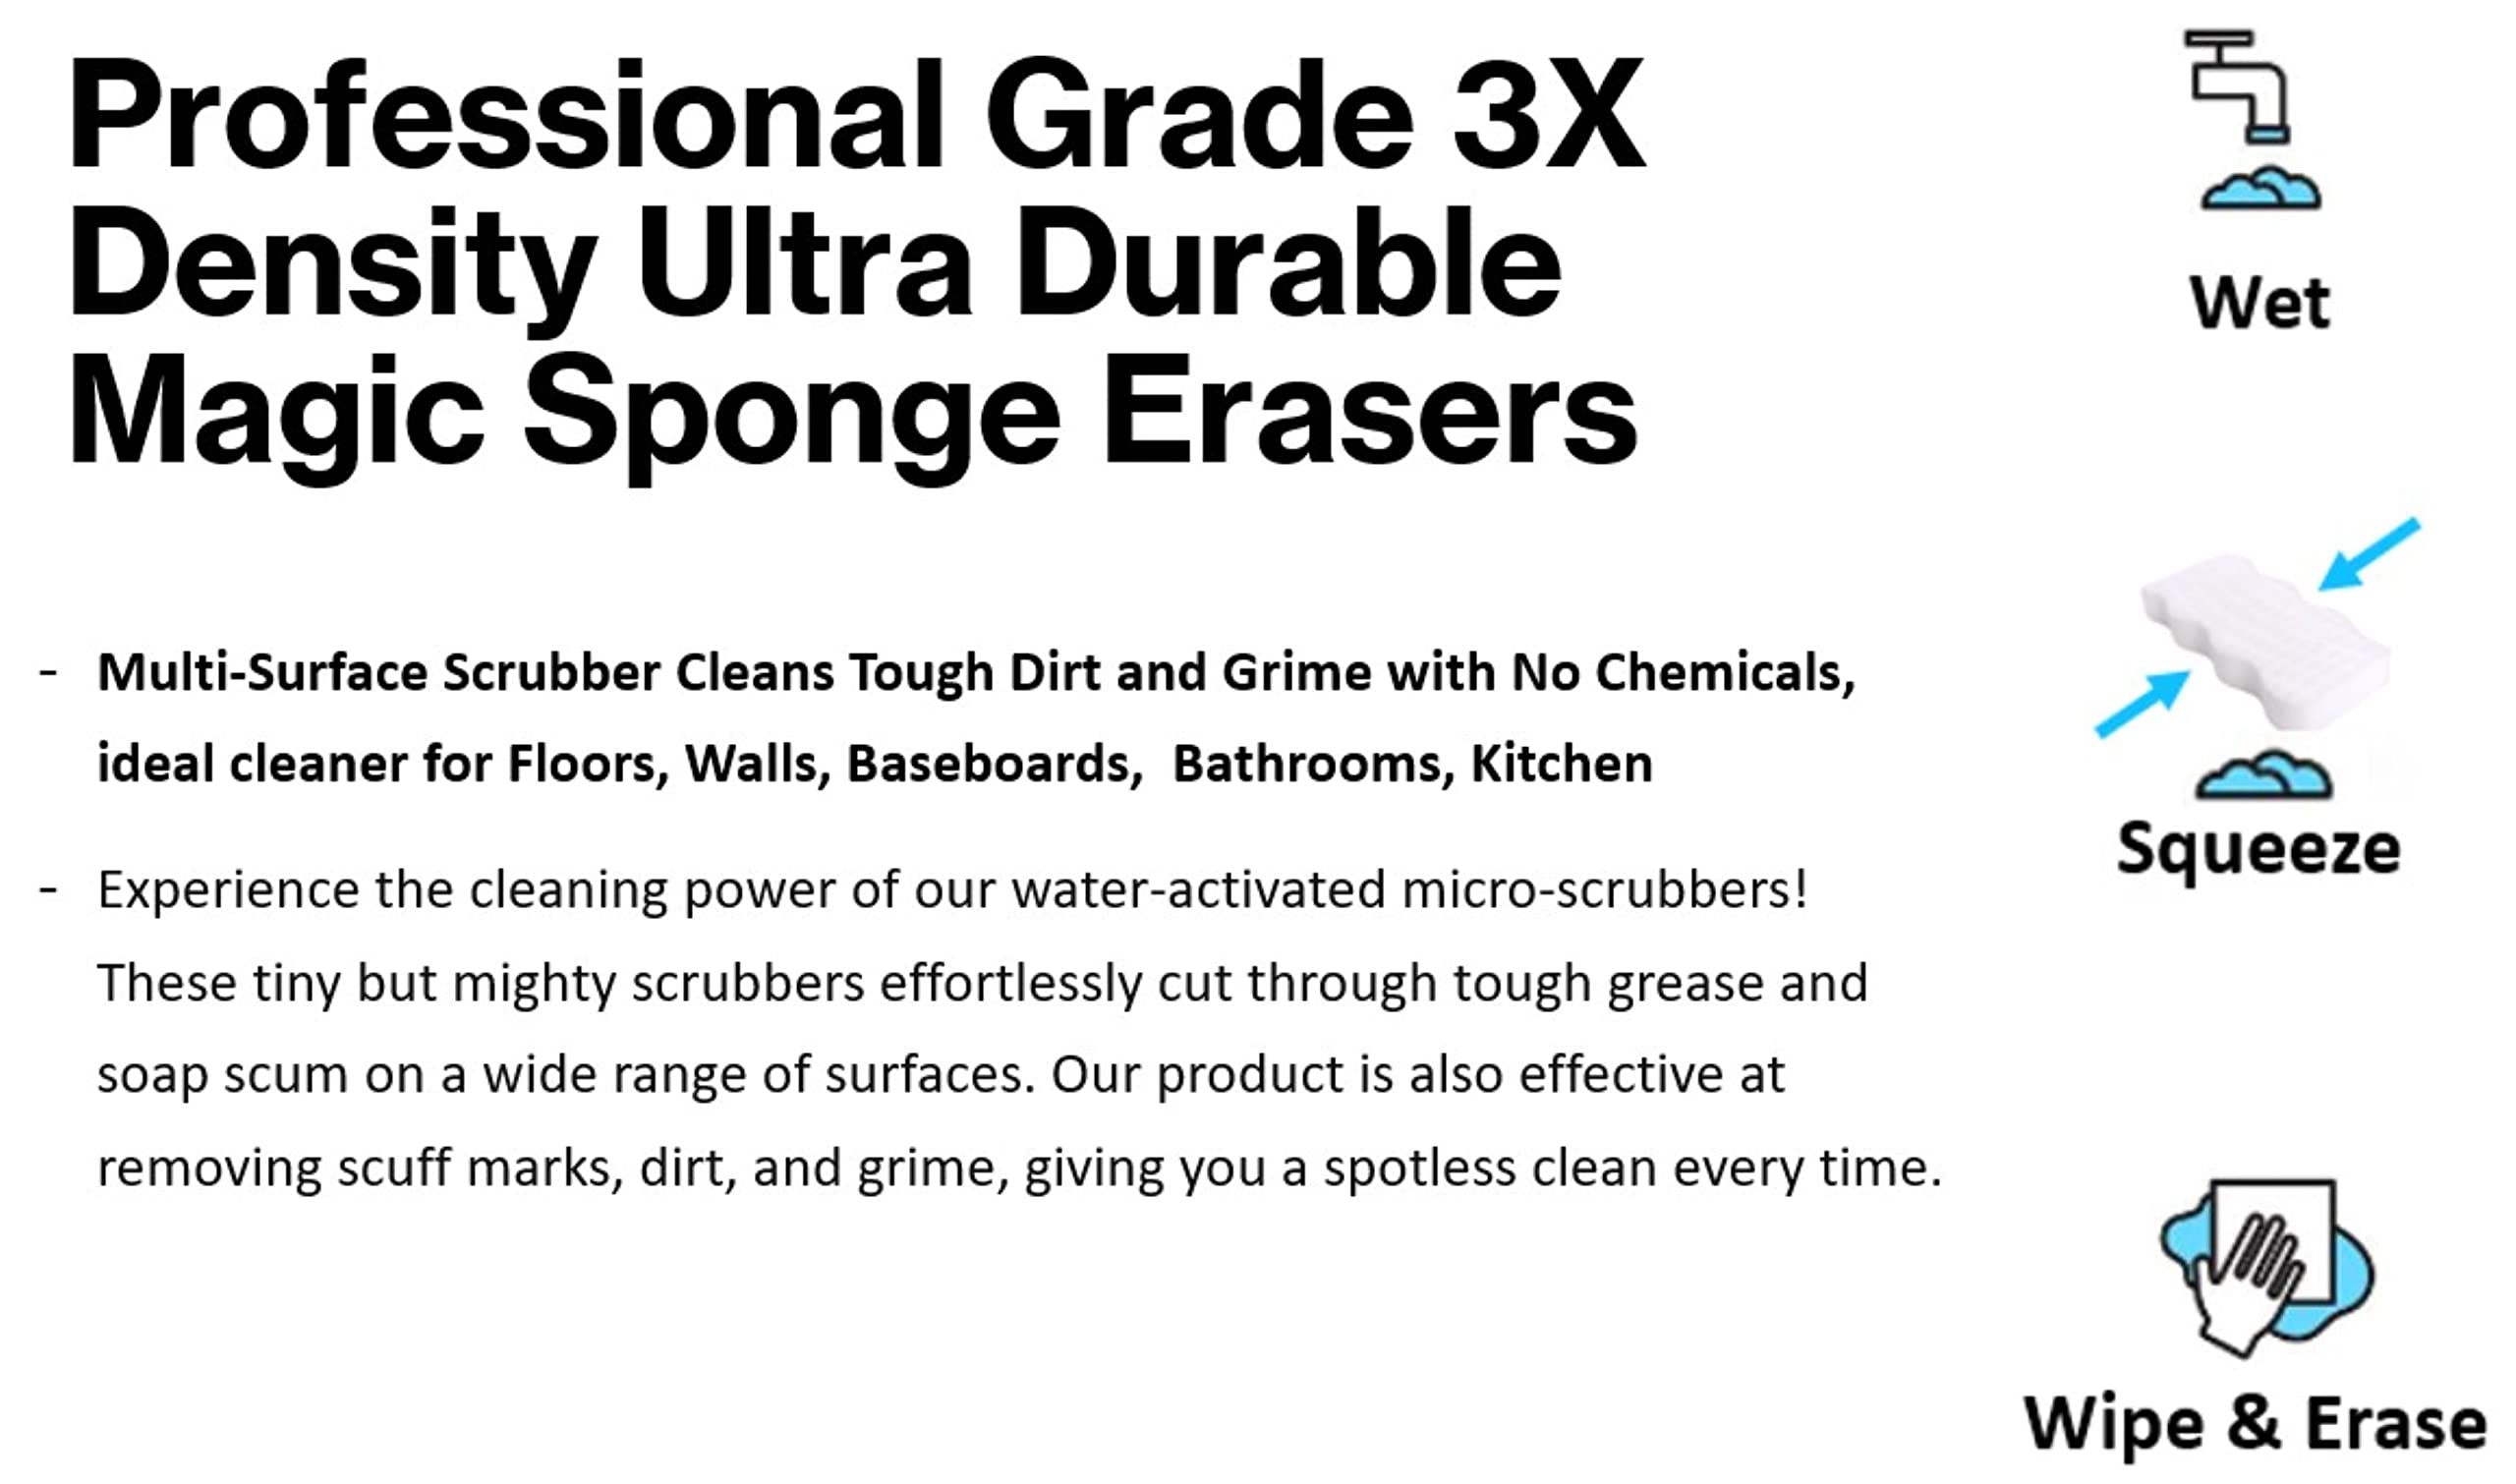 12 Pack 3X Density Ultra Durable Magic Sponge Erasers Professional Grade Multi Surface Scrubber Cleans Tough Dirt Scuffs Marks and Grime with No Chemicals Floor Wall Baseboard Bathroom Cleaner